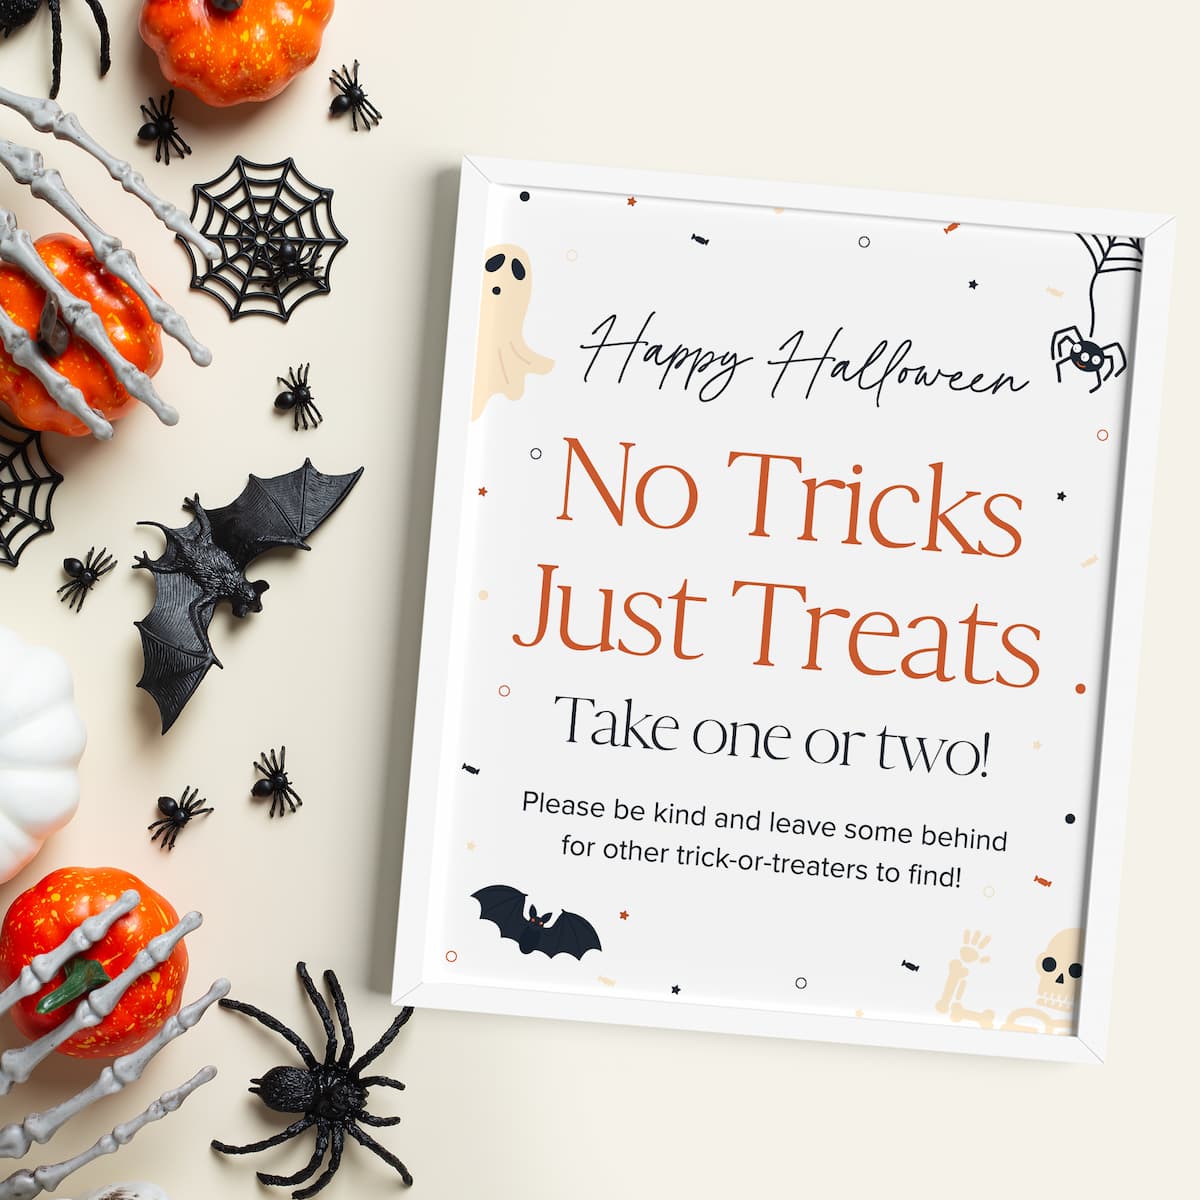 Free printable Halloween candy bowl preview in frame.